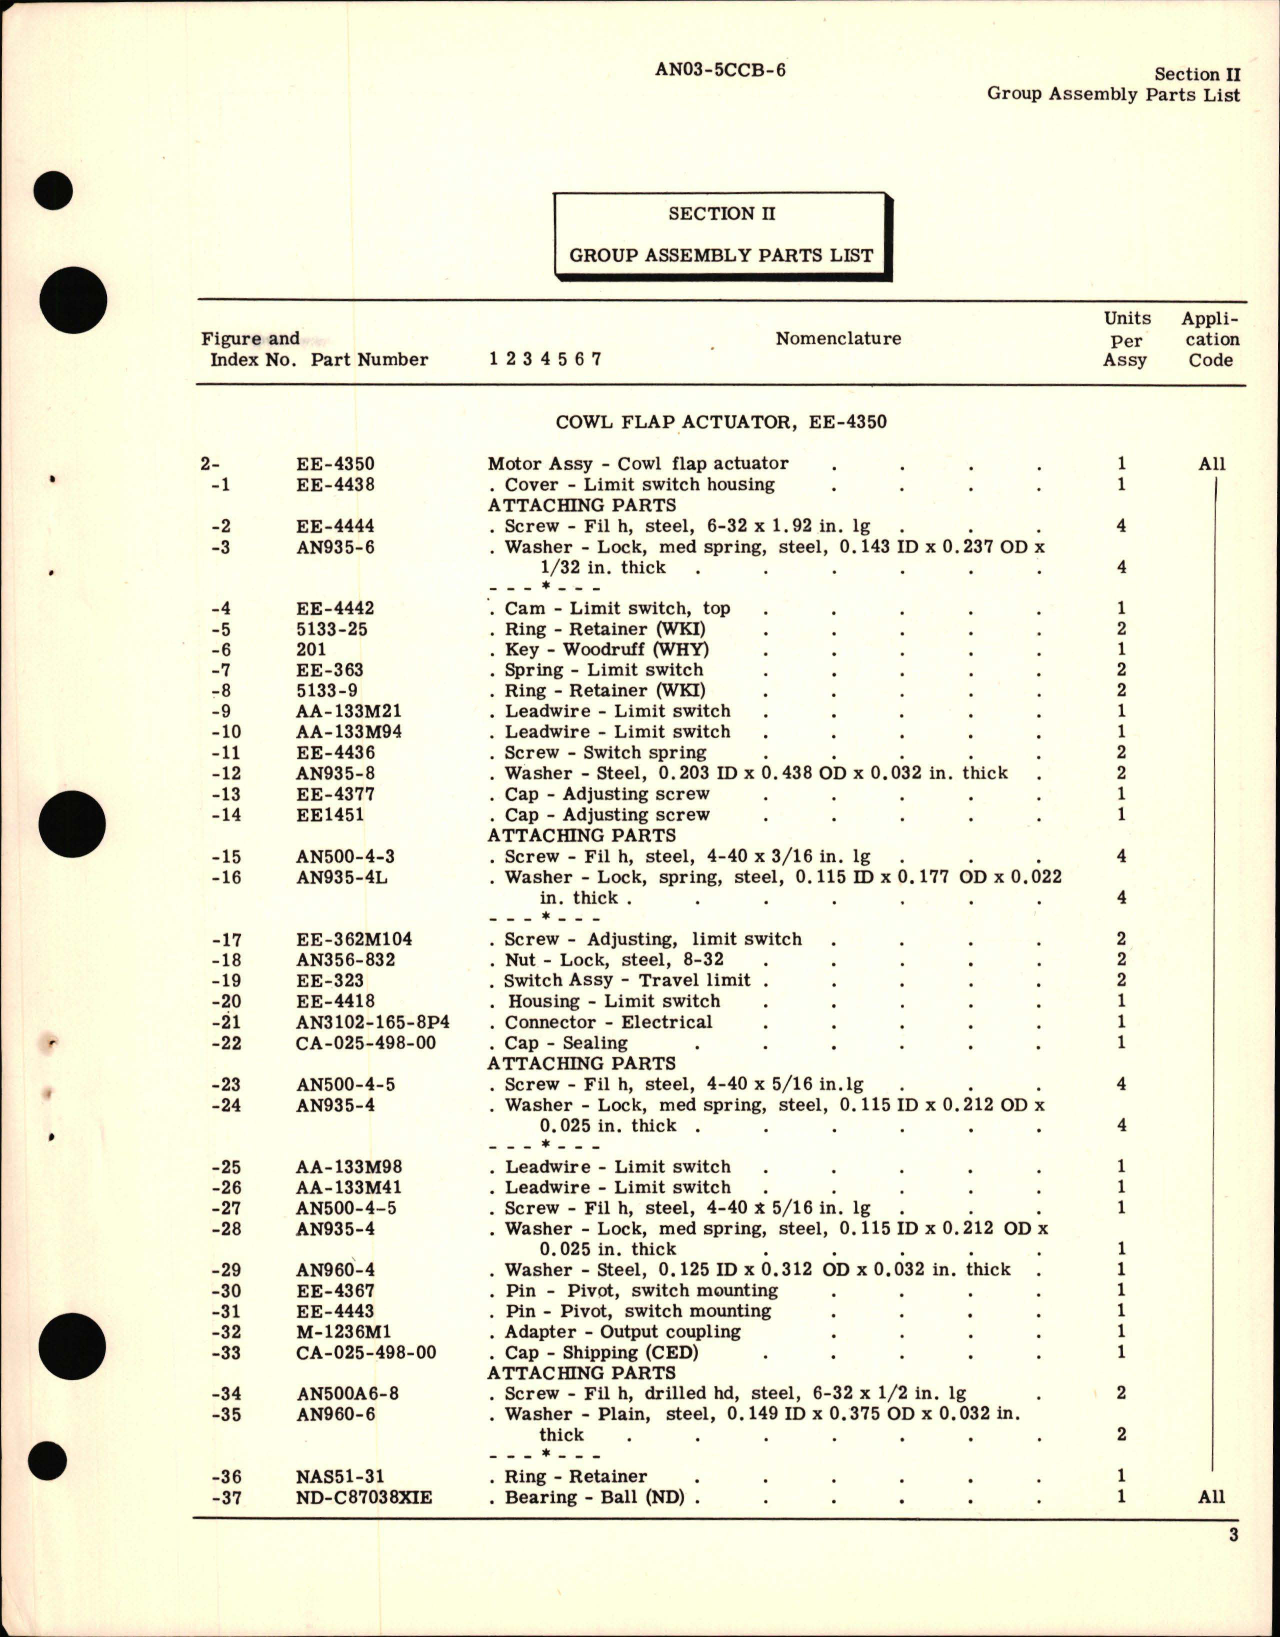 Sample page 5 from AirCorps Library document: Parts Catalog for Cowl Flap Actuator EE-4350 